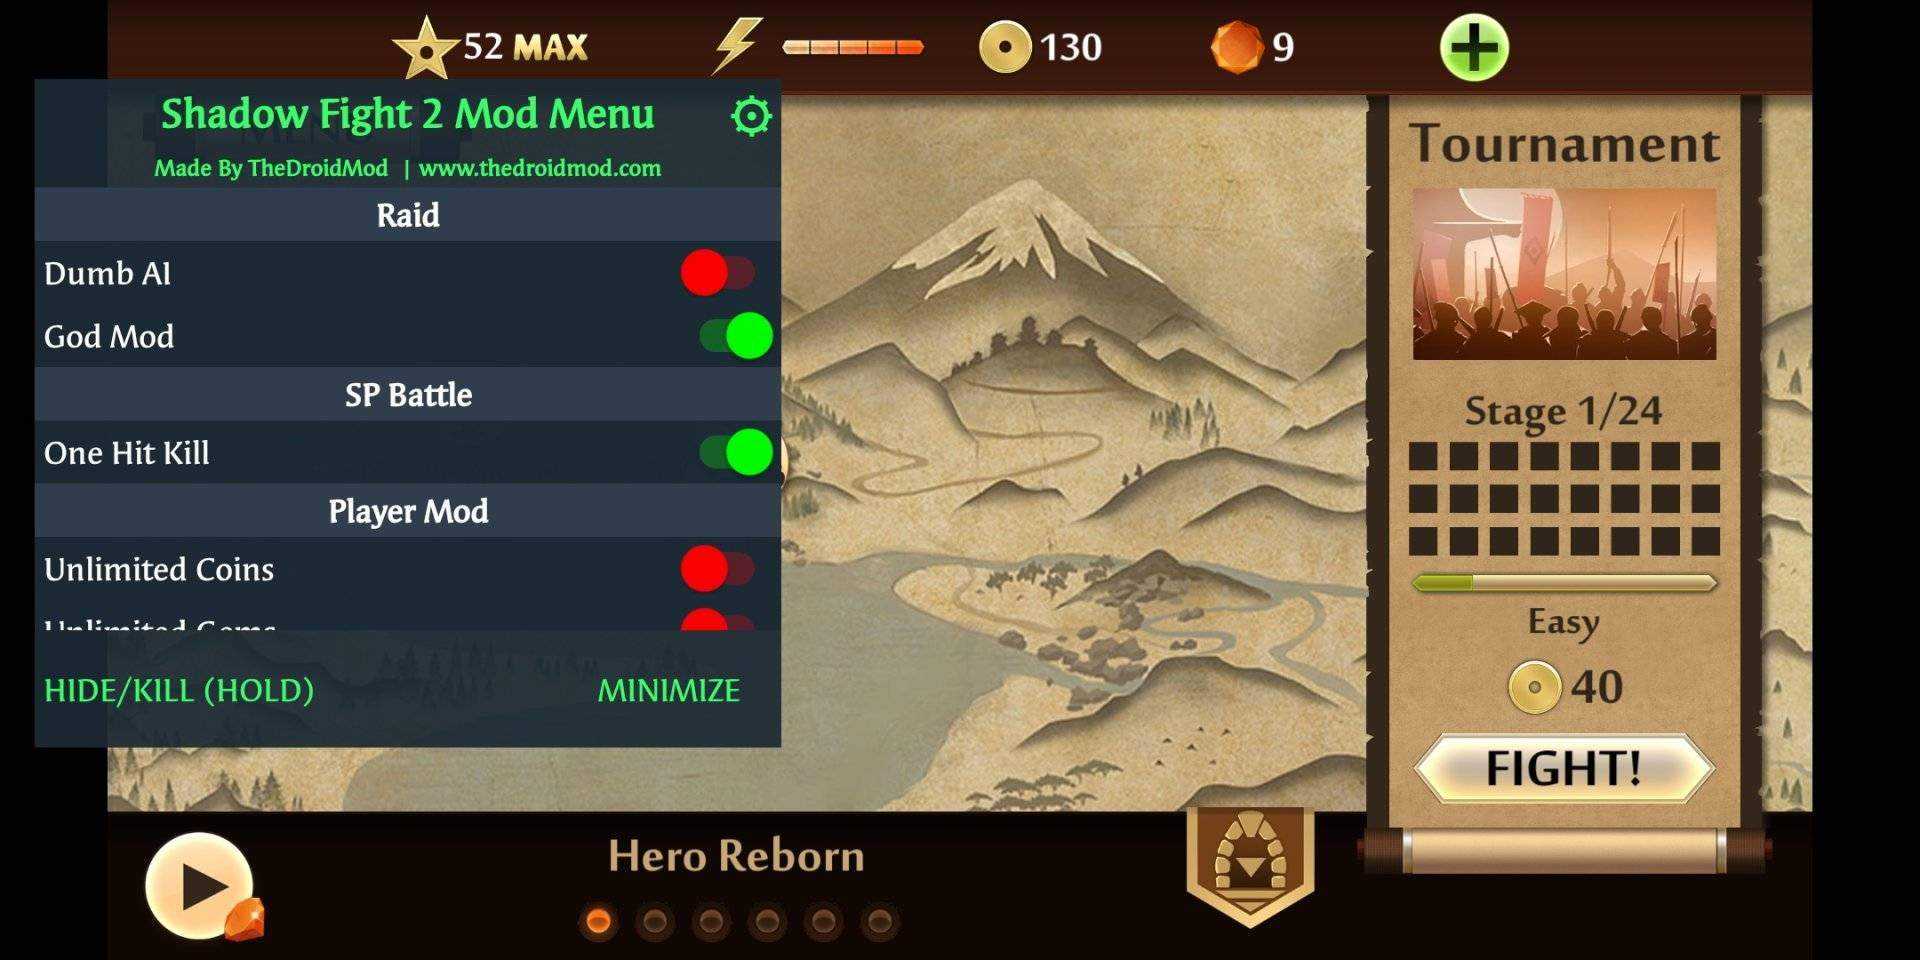 Shadow Fight 2 Mod Menu apk | Pinoy Internet and Technology Forums